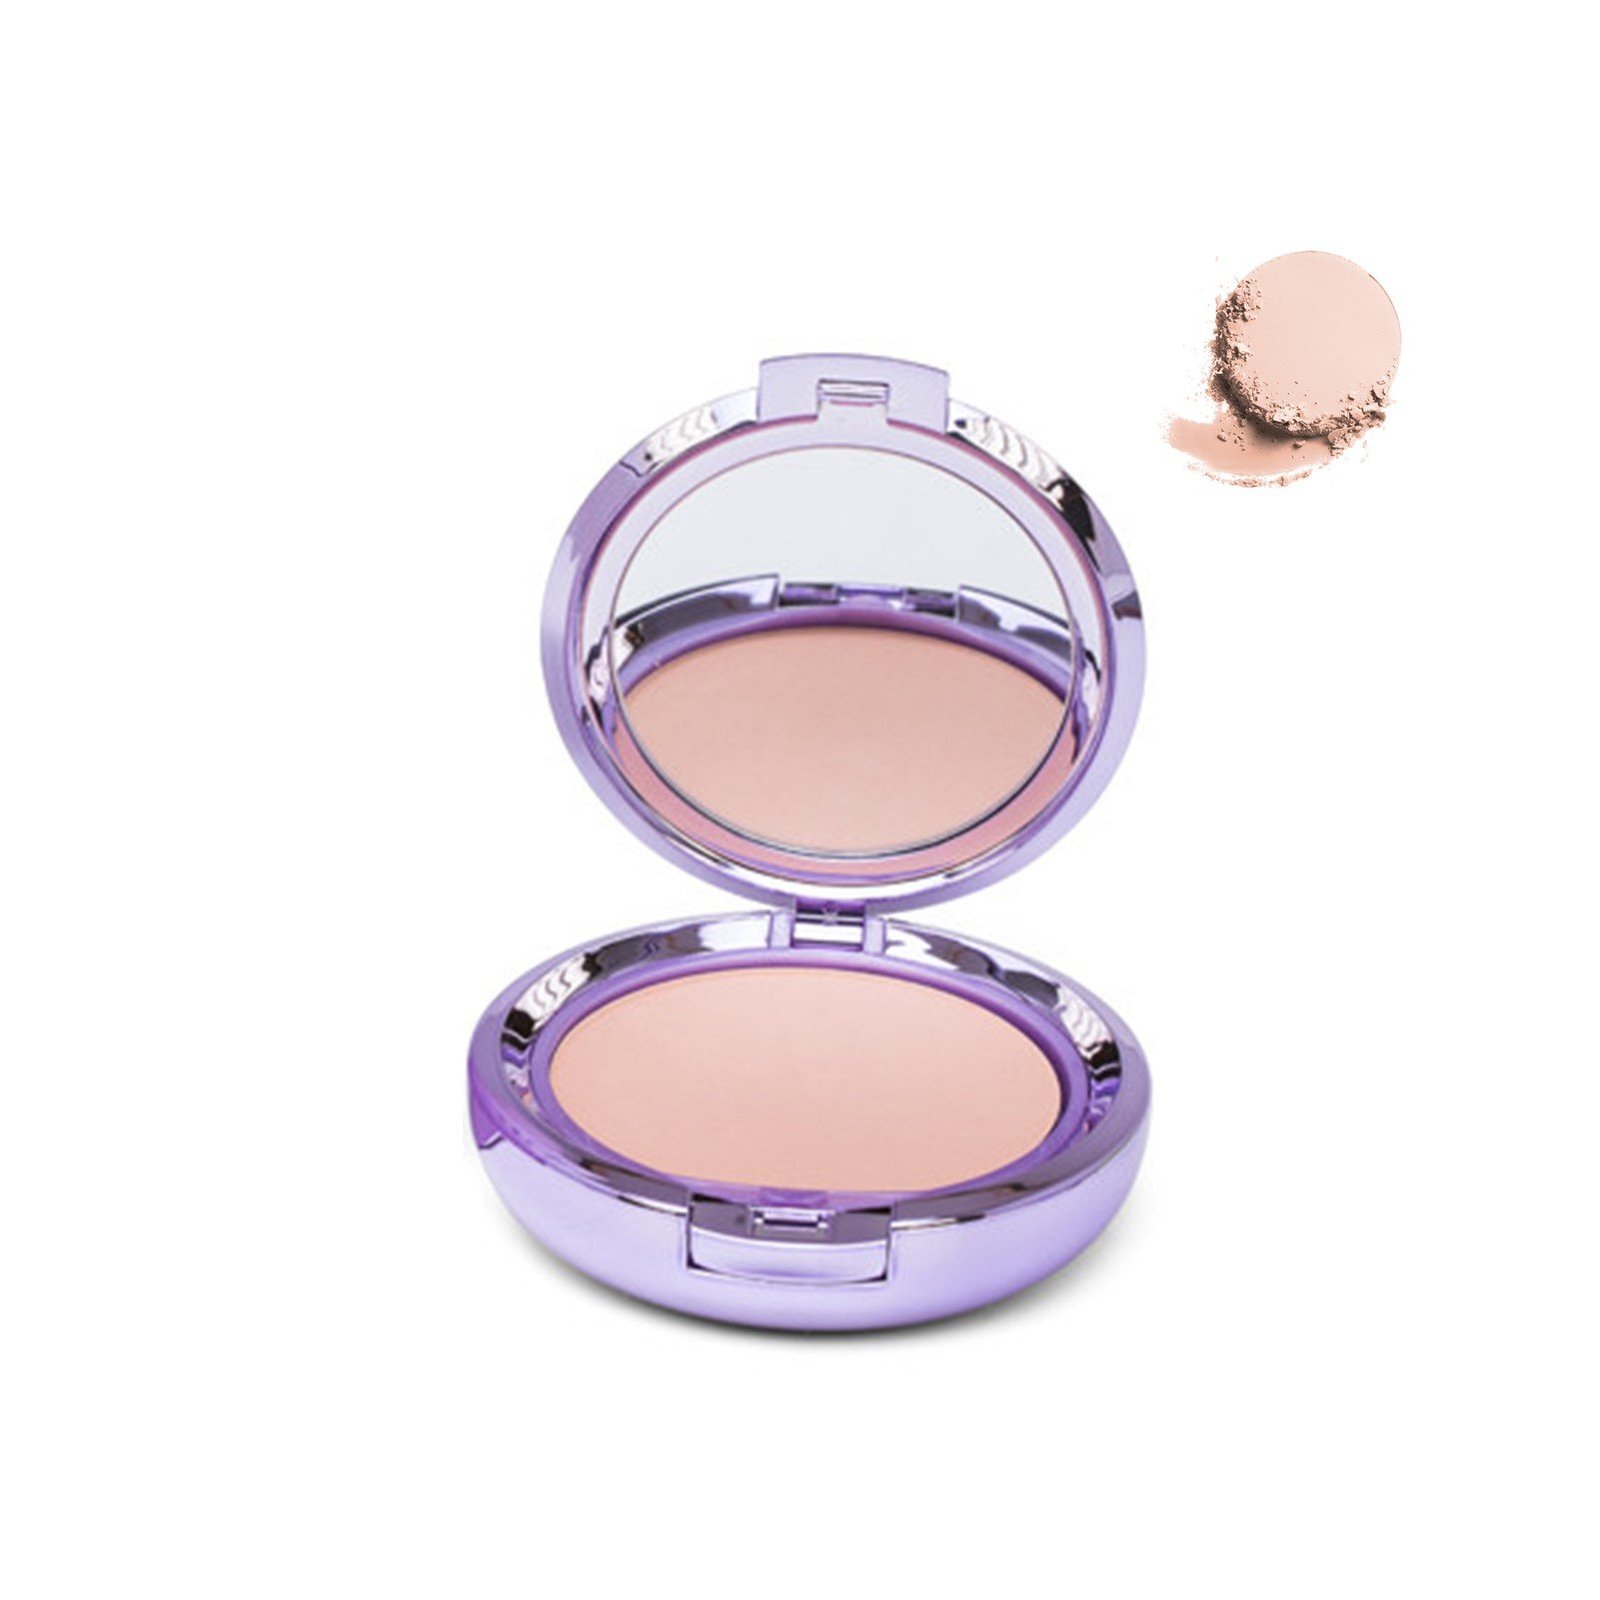 Covermark Compact Powder Oily-Acneic Skin 2 10g